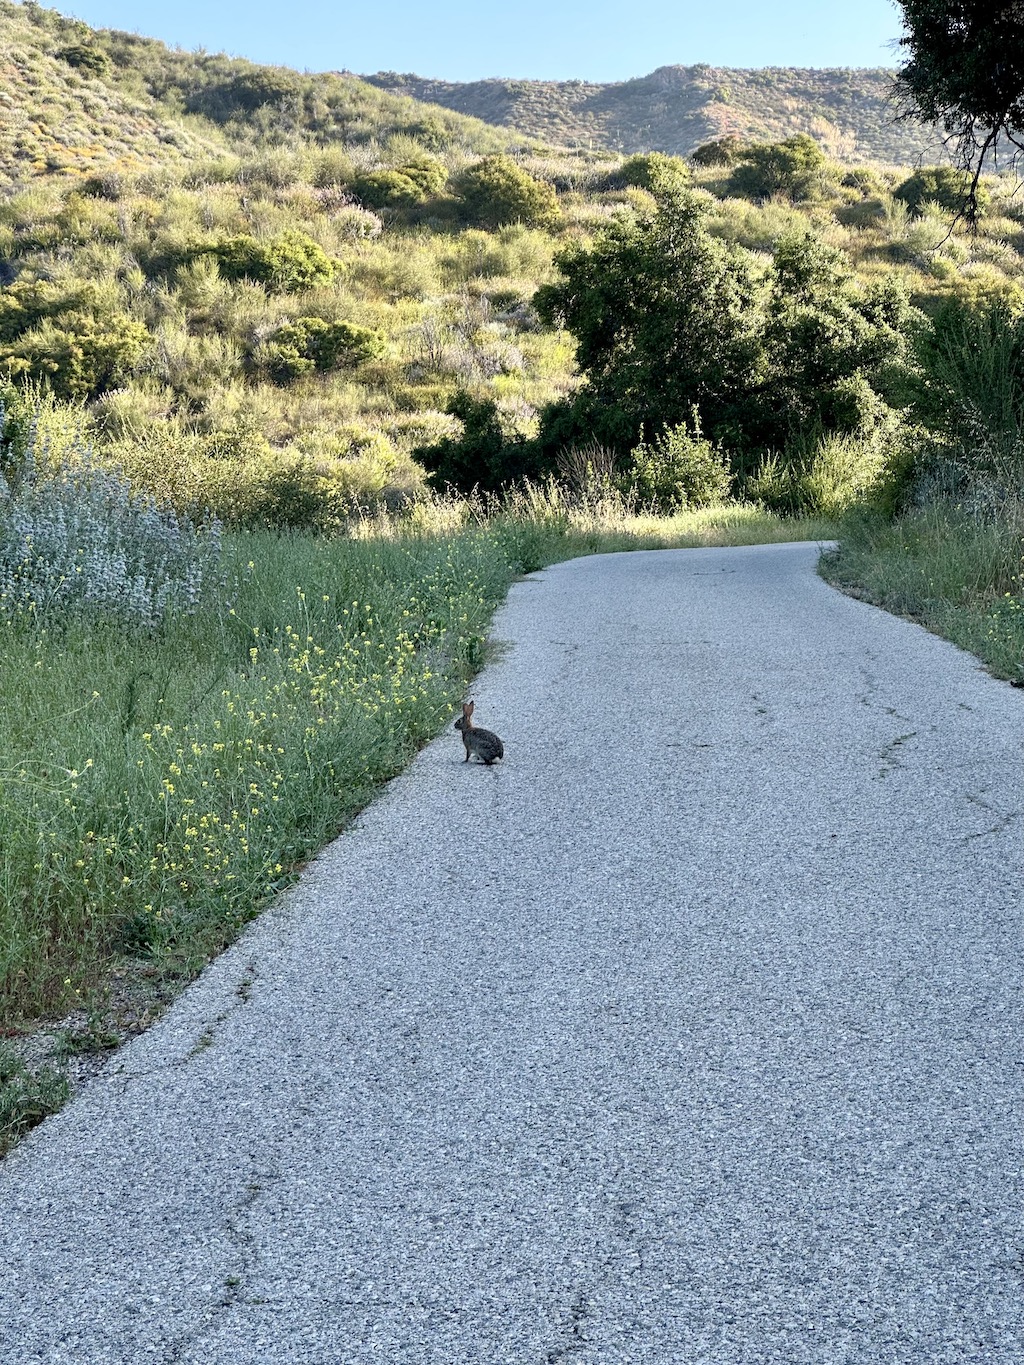 bunny on a paved path in the middle of nowhere